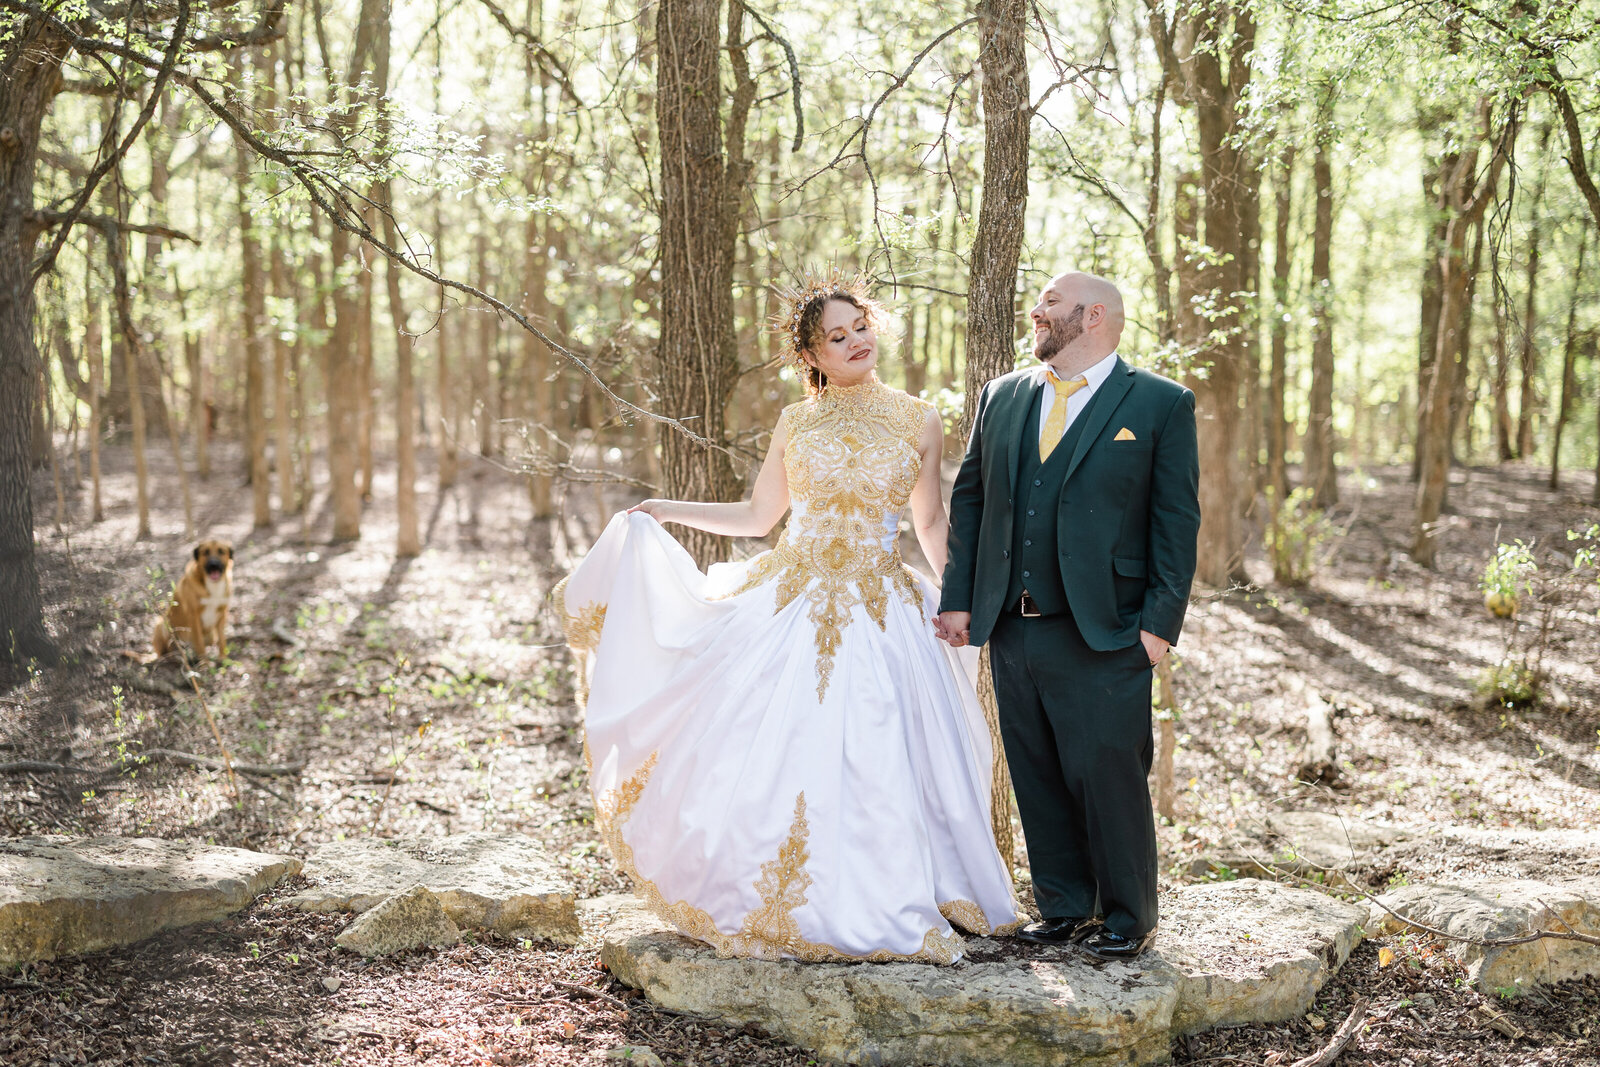 A bride in a gold crown and gold accented dress holds her groom's hand while fanning her skirt out. The groom is wearing a green suit. They are in a forest setting and standing on top of a rock. Their dog is in the background and out of focus. They are both smiling at each other.